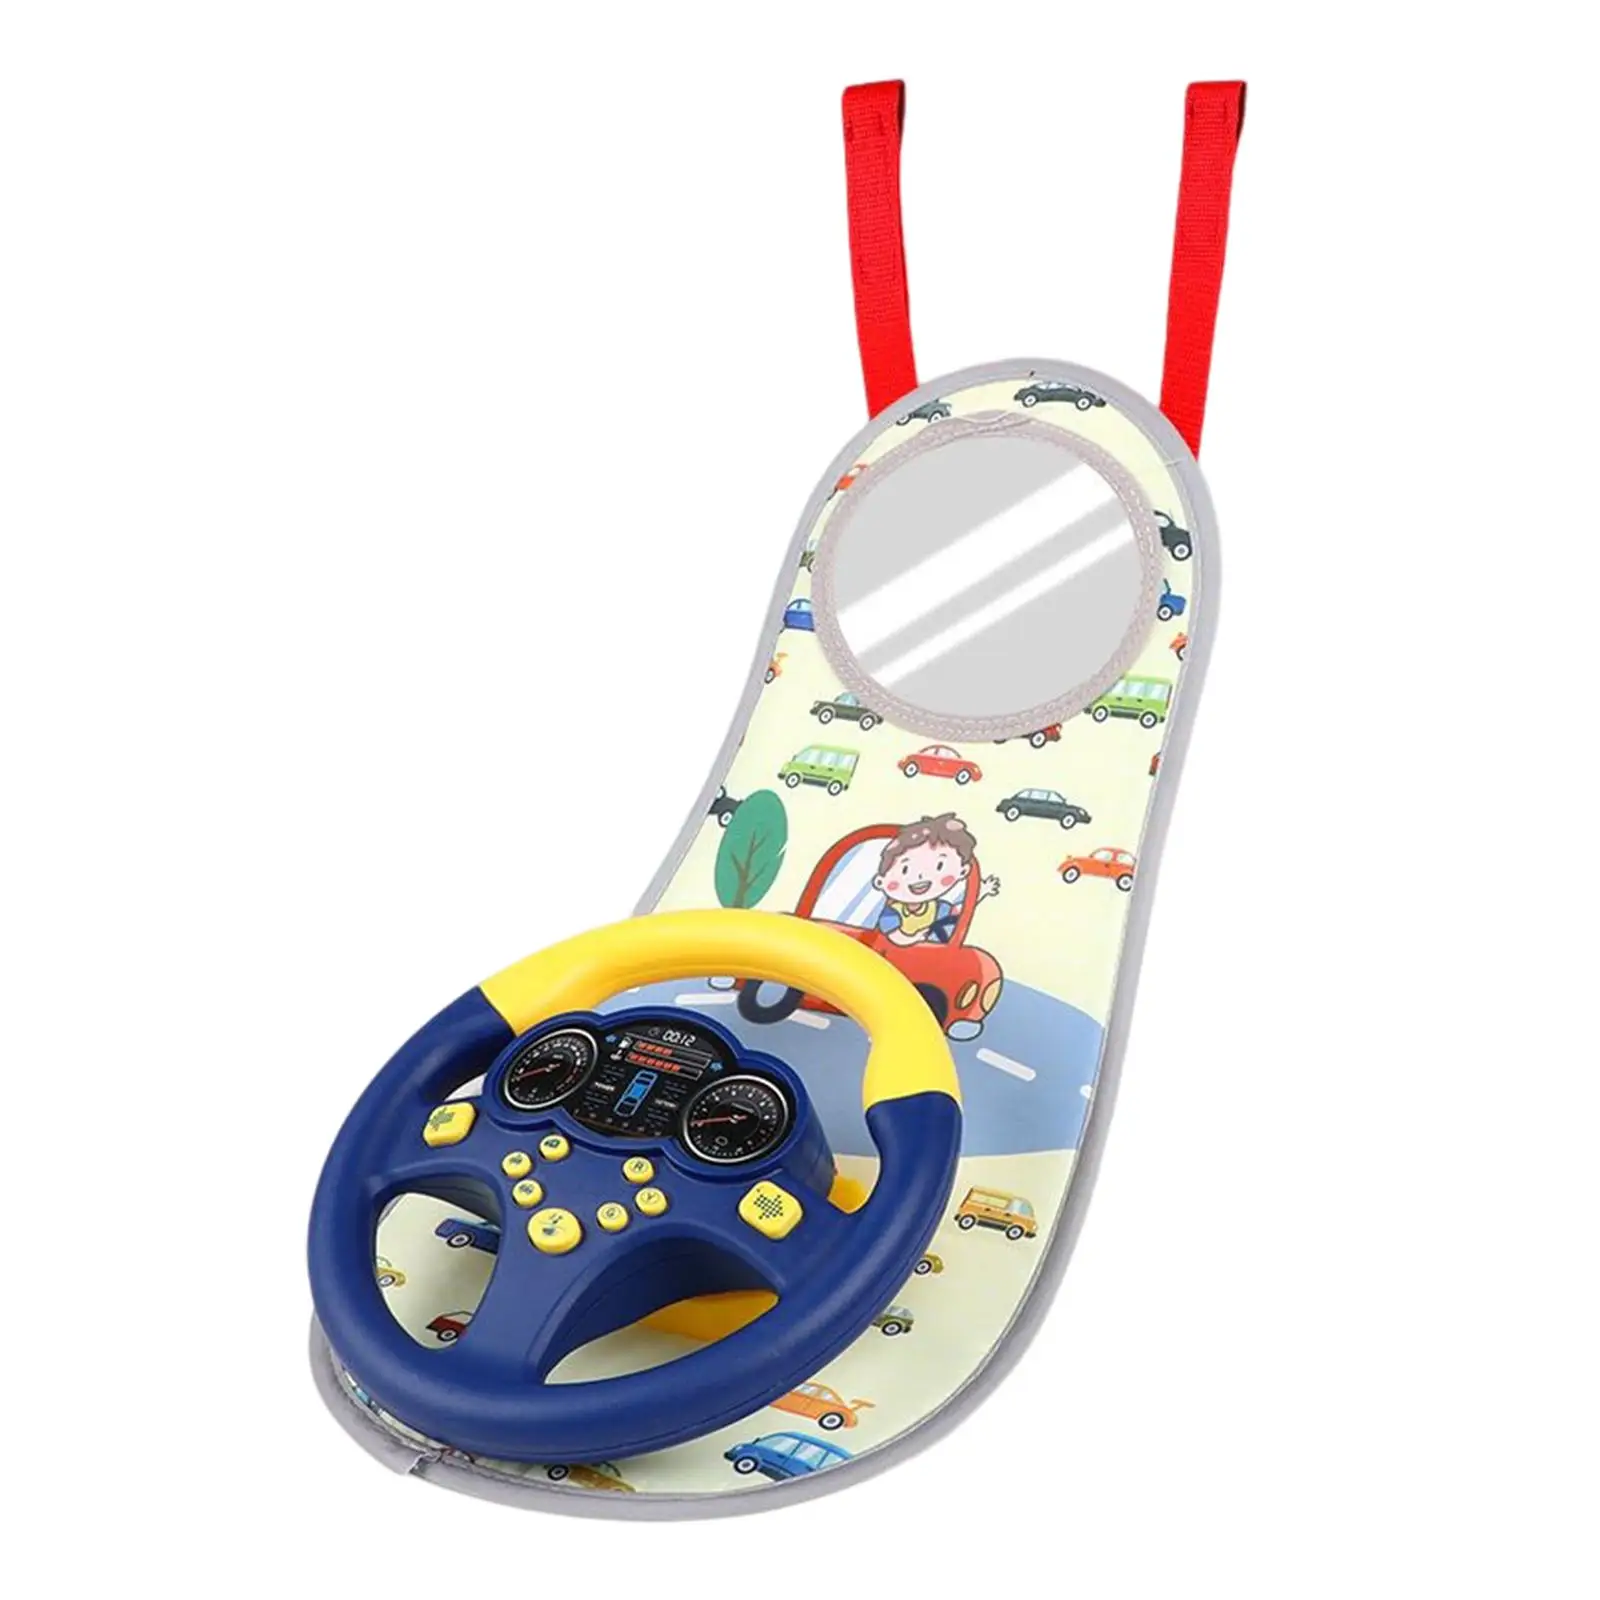 Multifunctional Car Seat Driving Game Play Center Toy for Toddlers Gifts